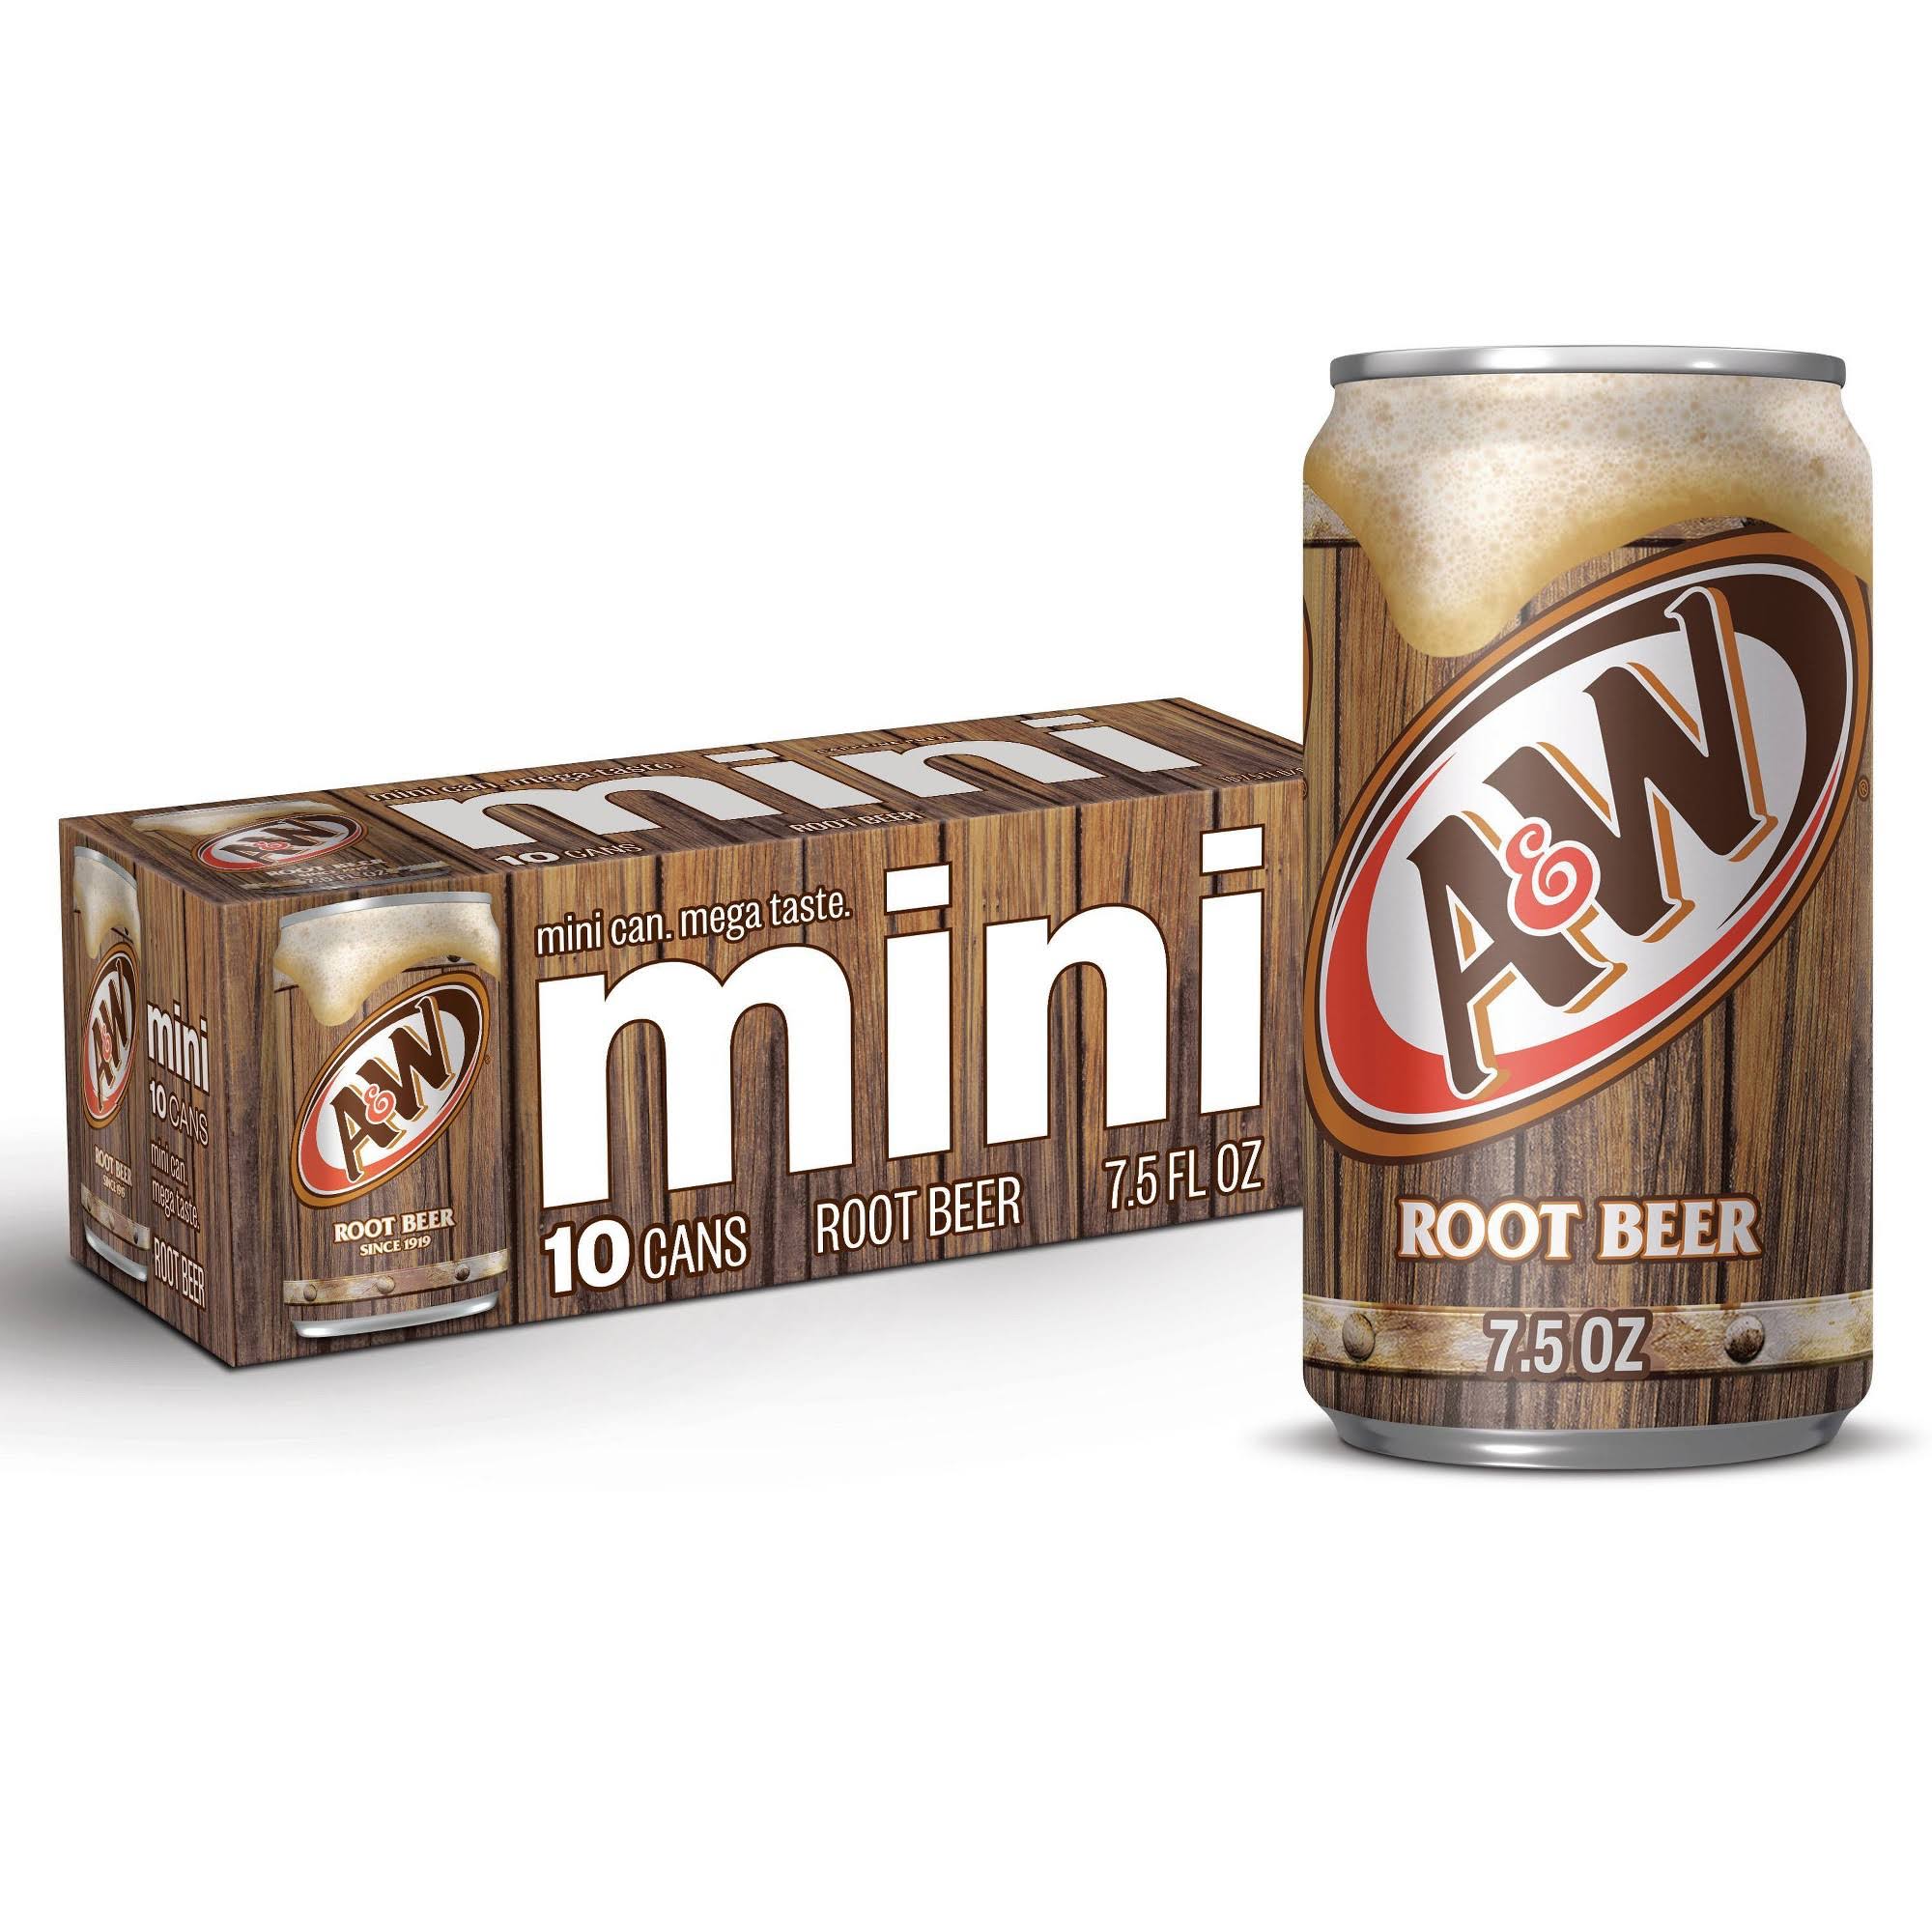 A&W Soda, Root Beer, Mini - 10 pack, 7.5 fl oz cans